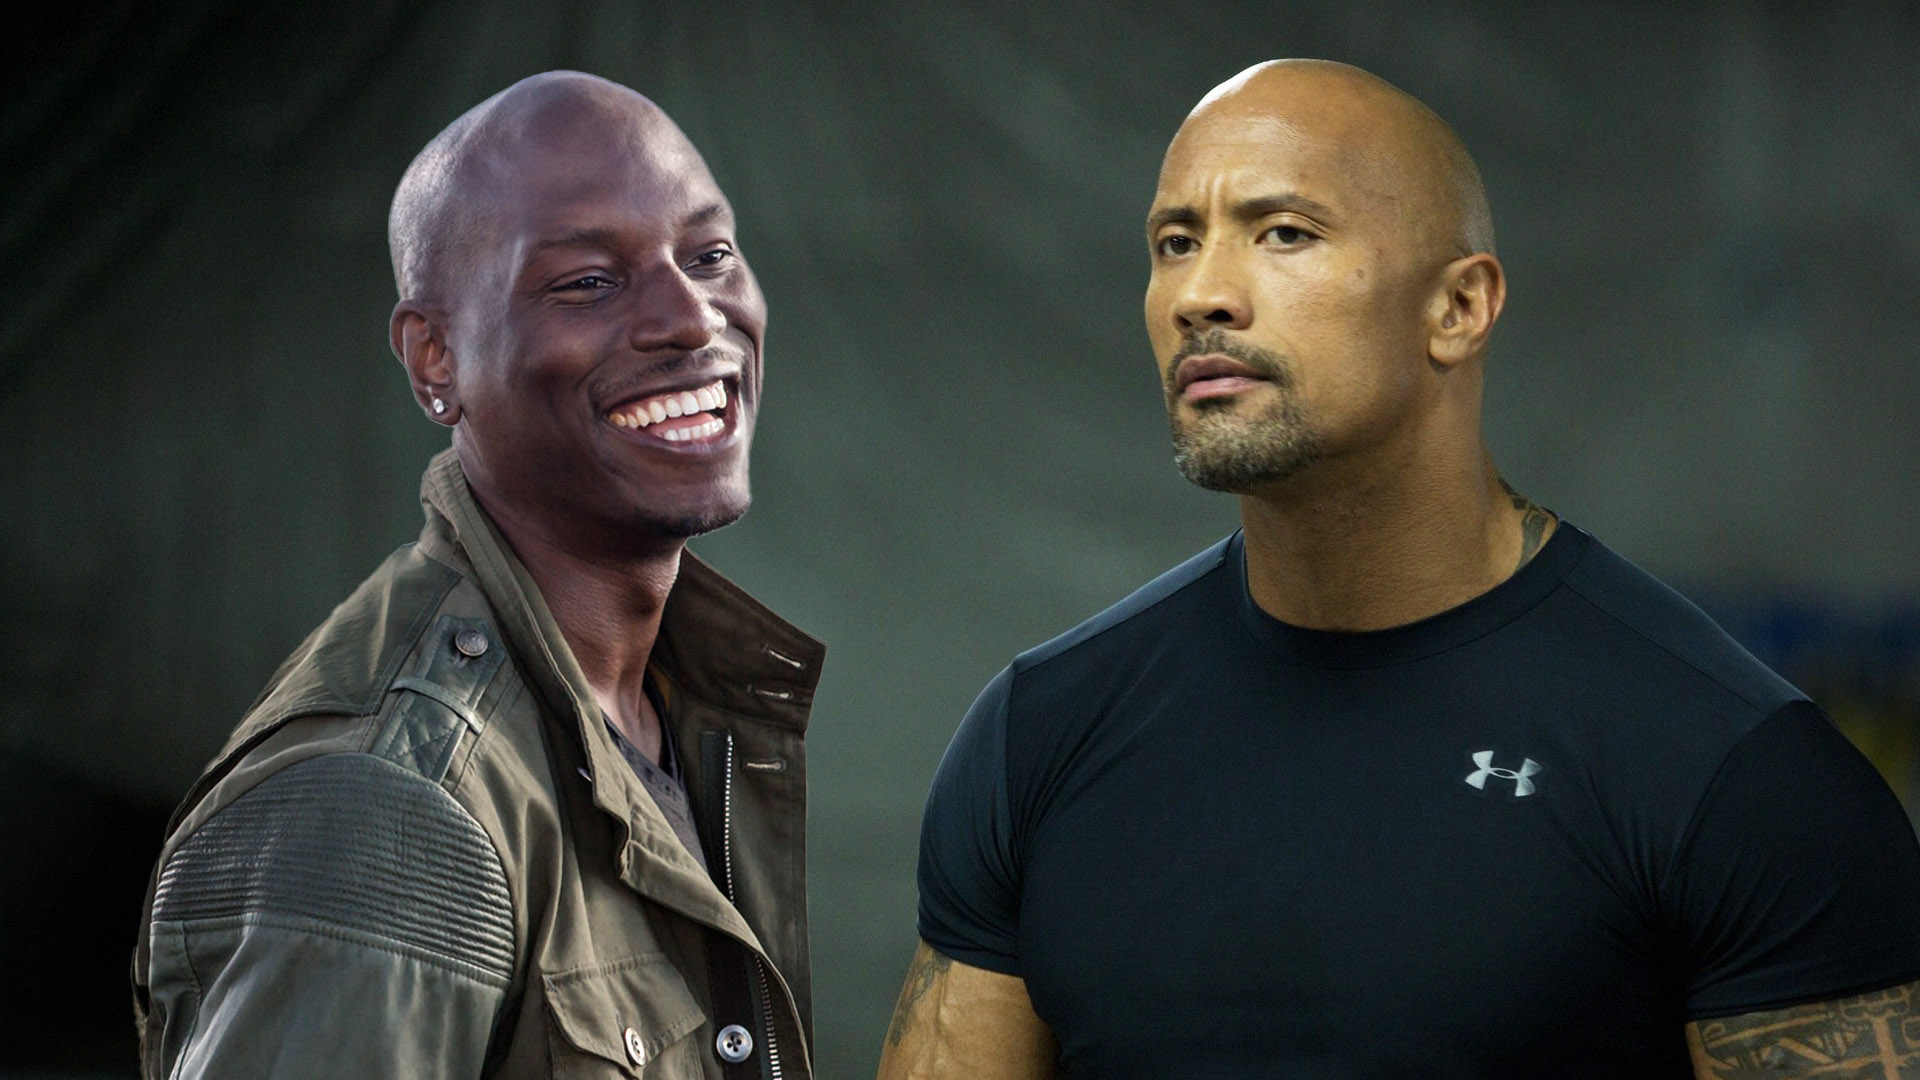 So What Happened to The Rock & Tyrese Gibson Fast & Furious Feud?